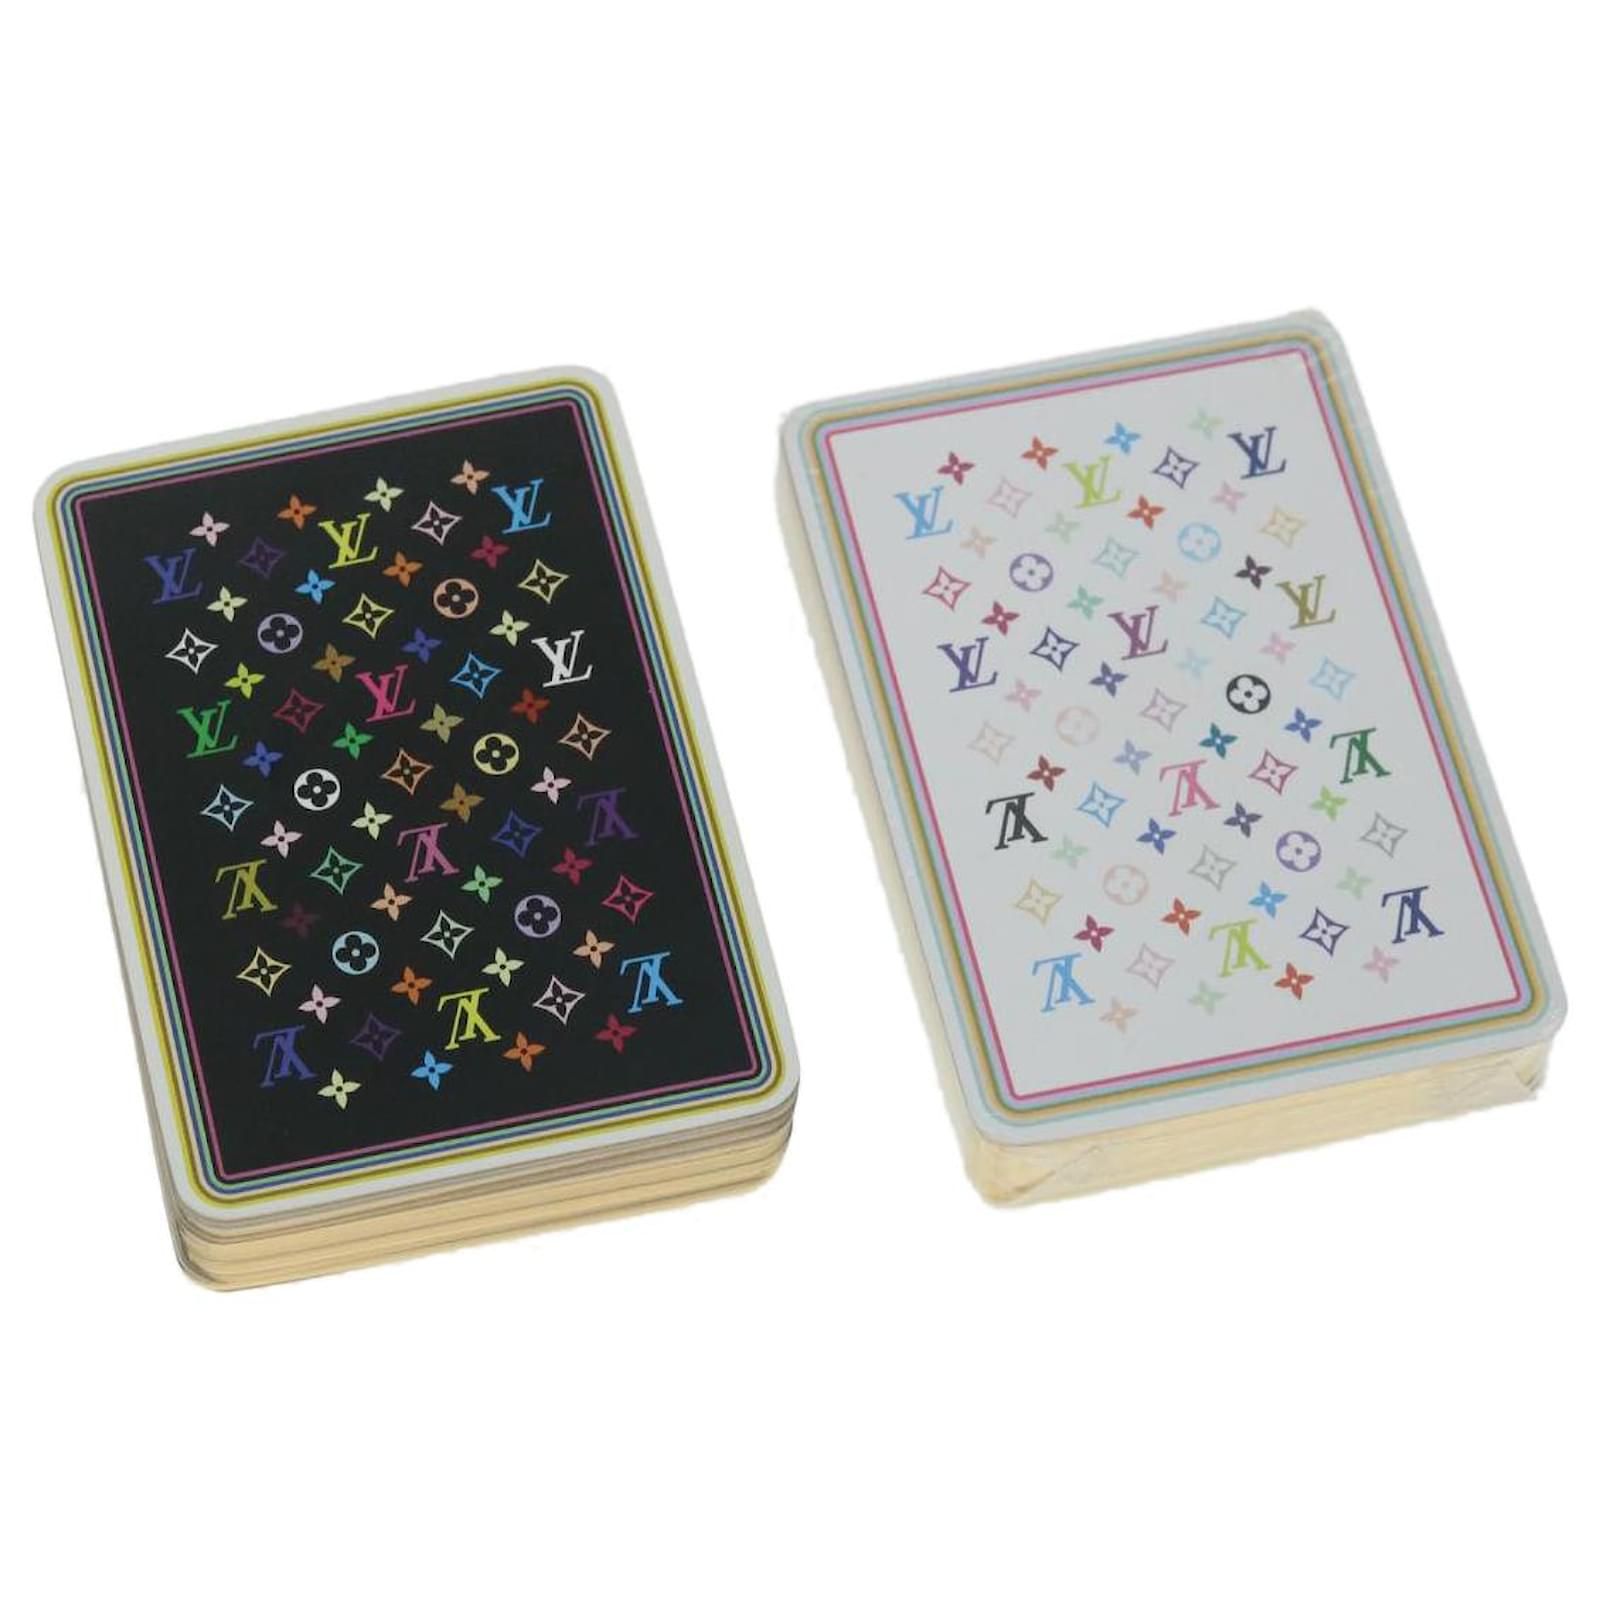 Louis Vuitton 3 French Decks of Playing Cards Cardboard Multicolor 10008330